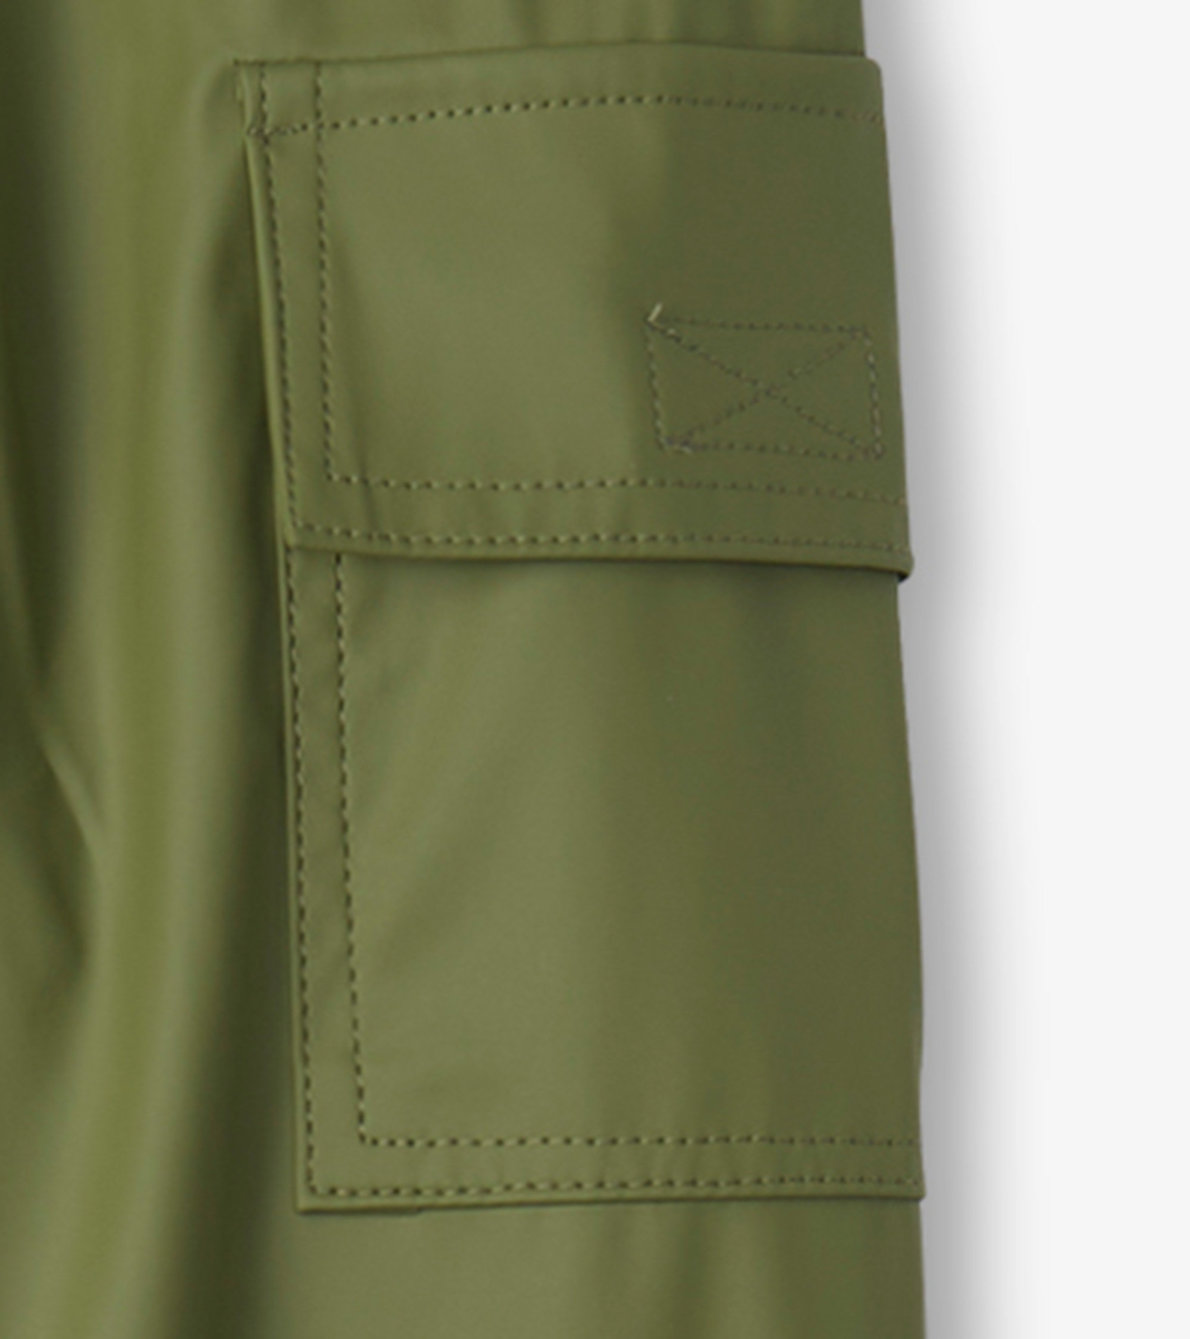 View larger image of Forest Green Kids Rain Pants